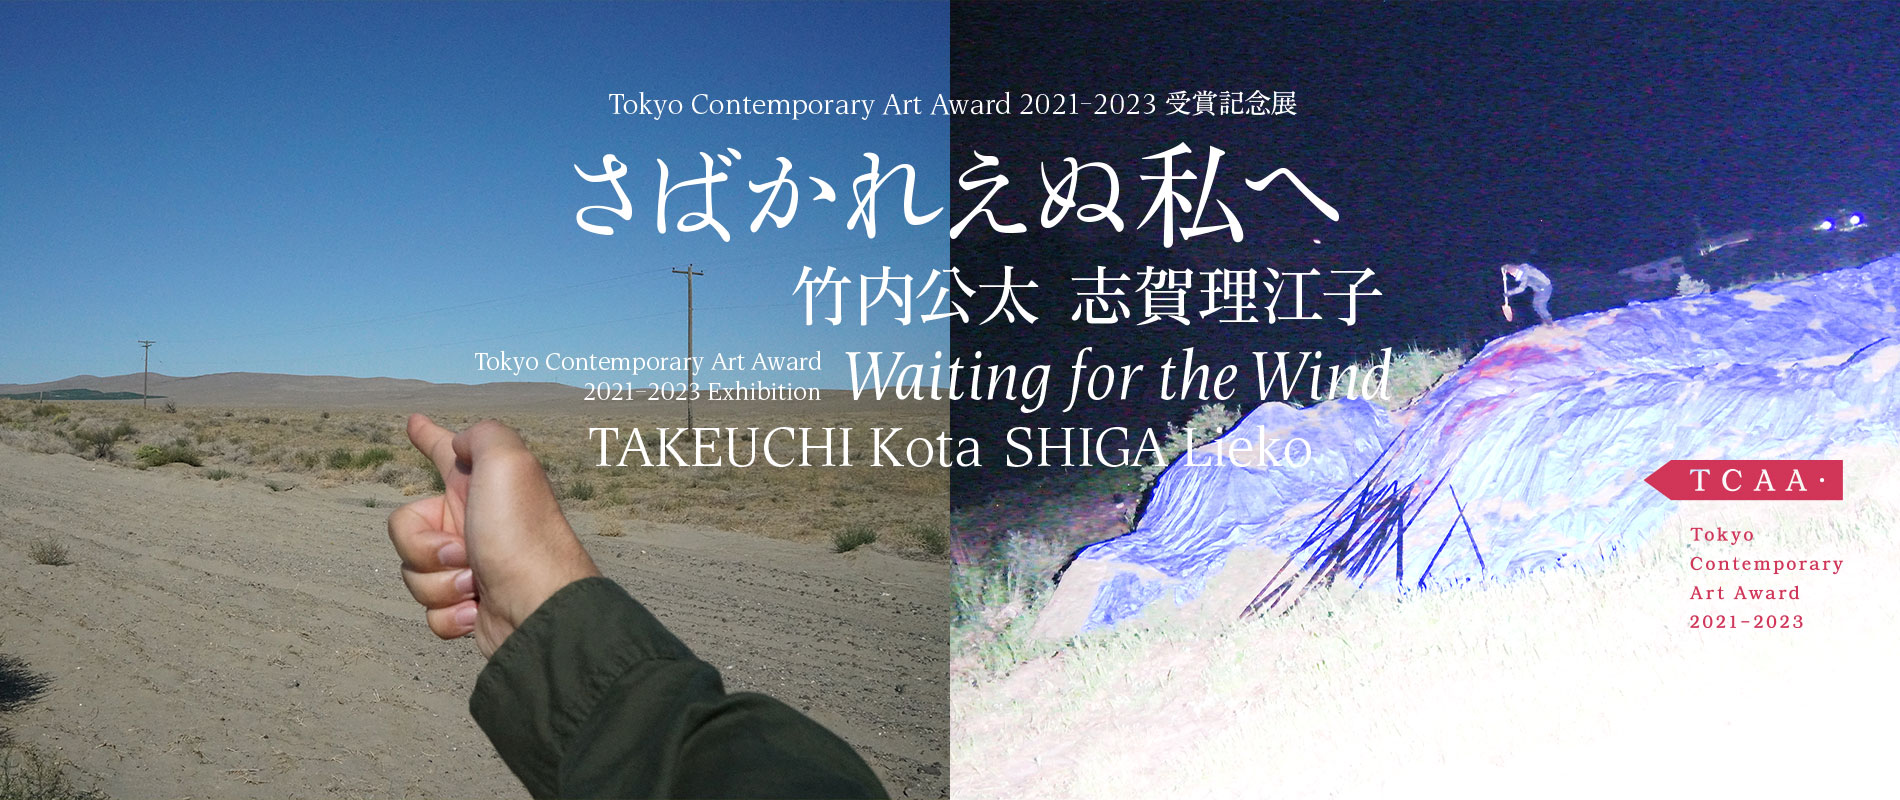 Waiting for the Wind Tokyo Contemporary Art Award 2021-2023 Exhibition